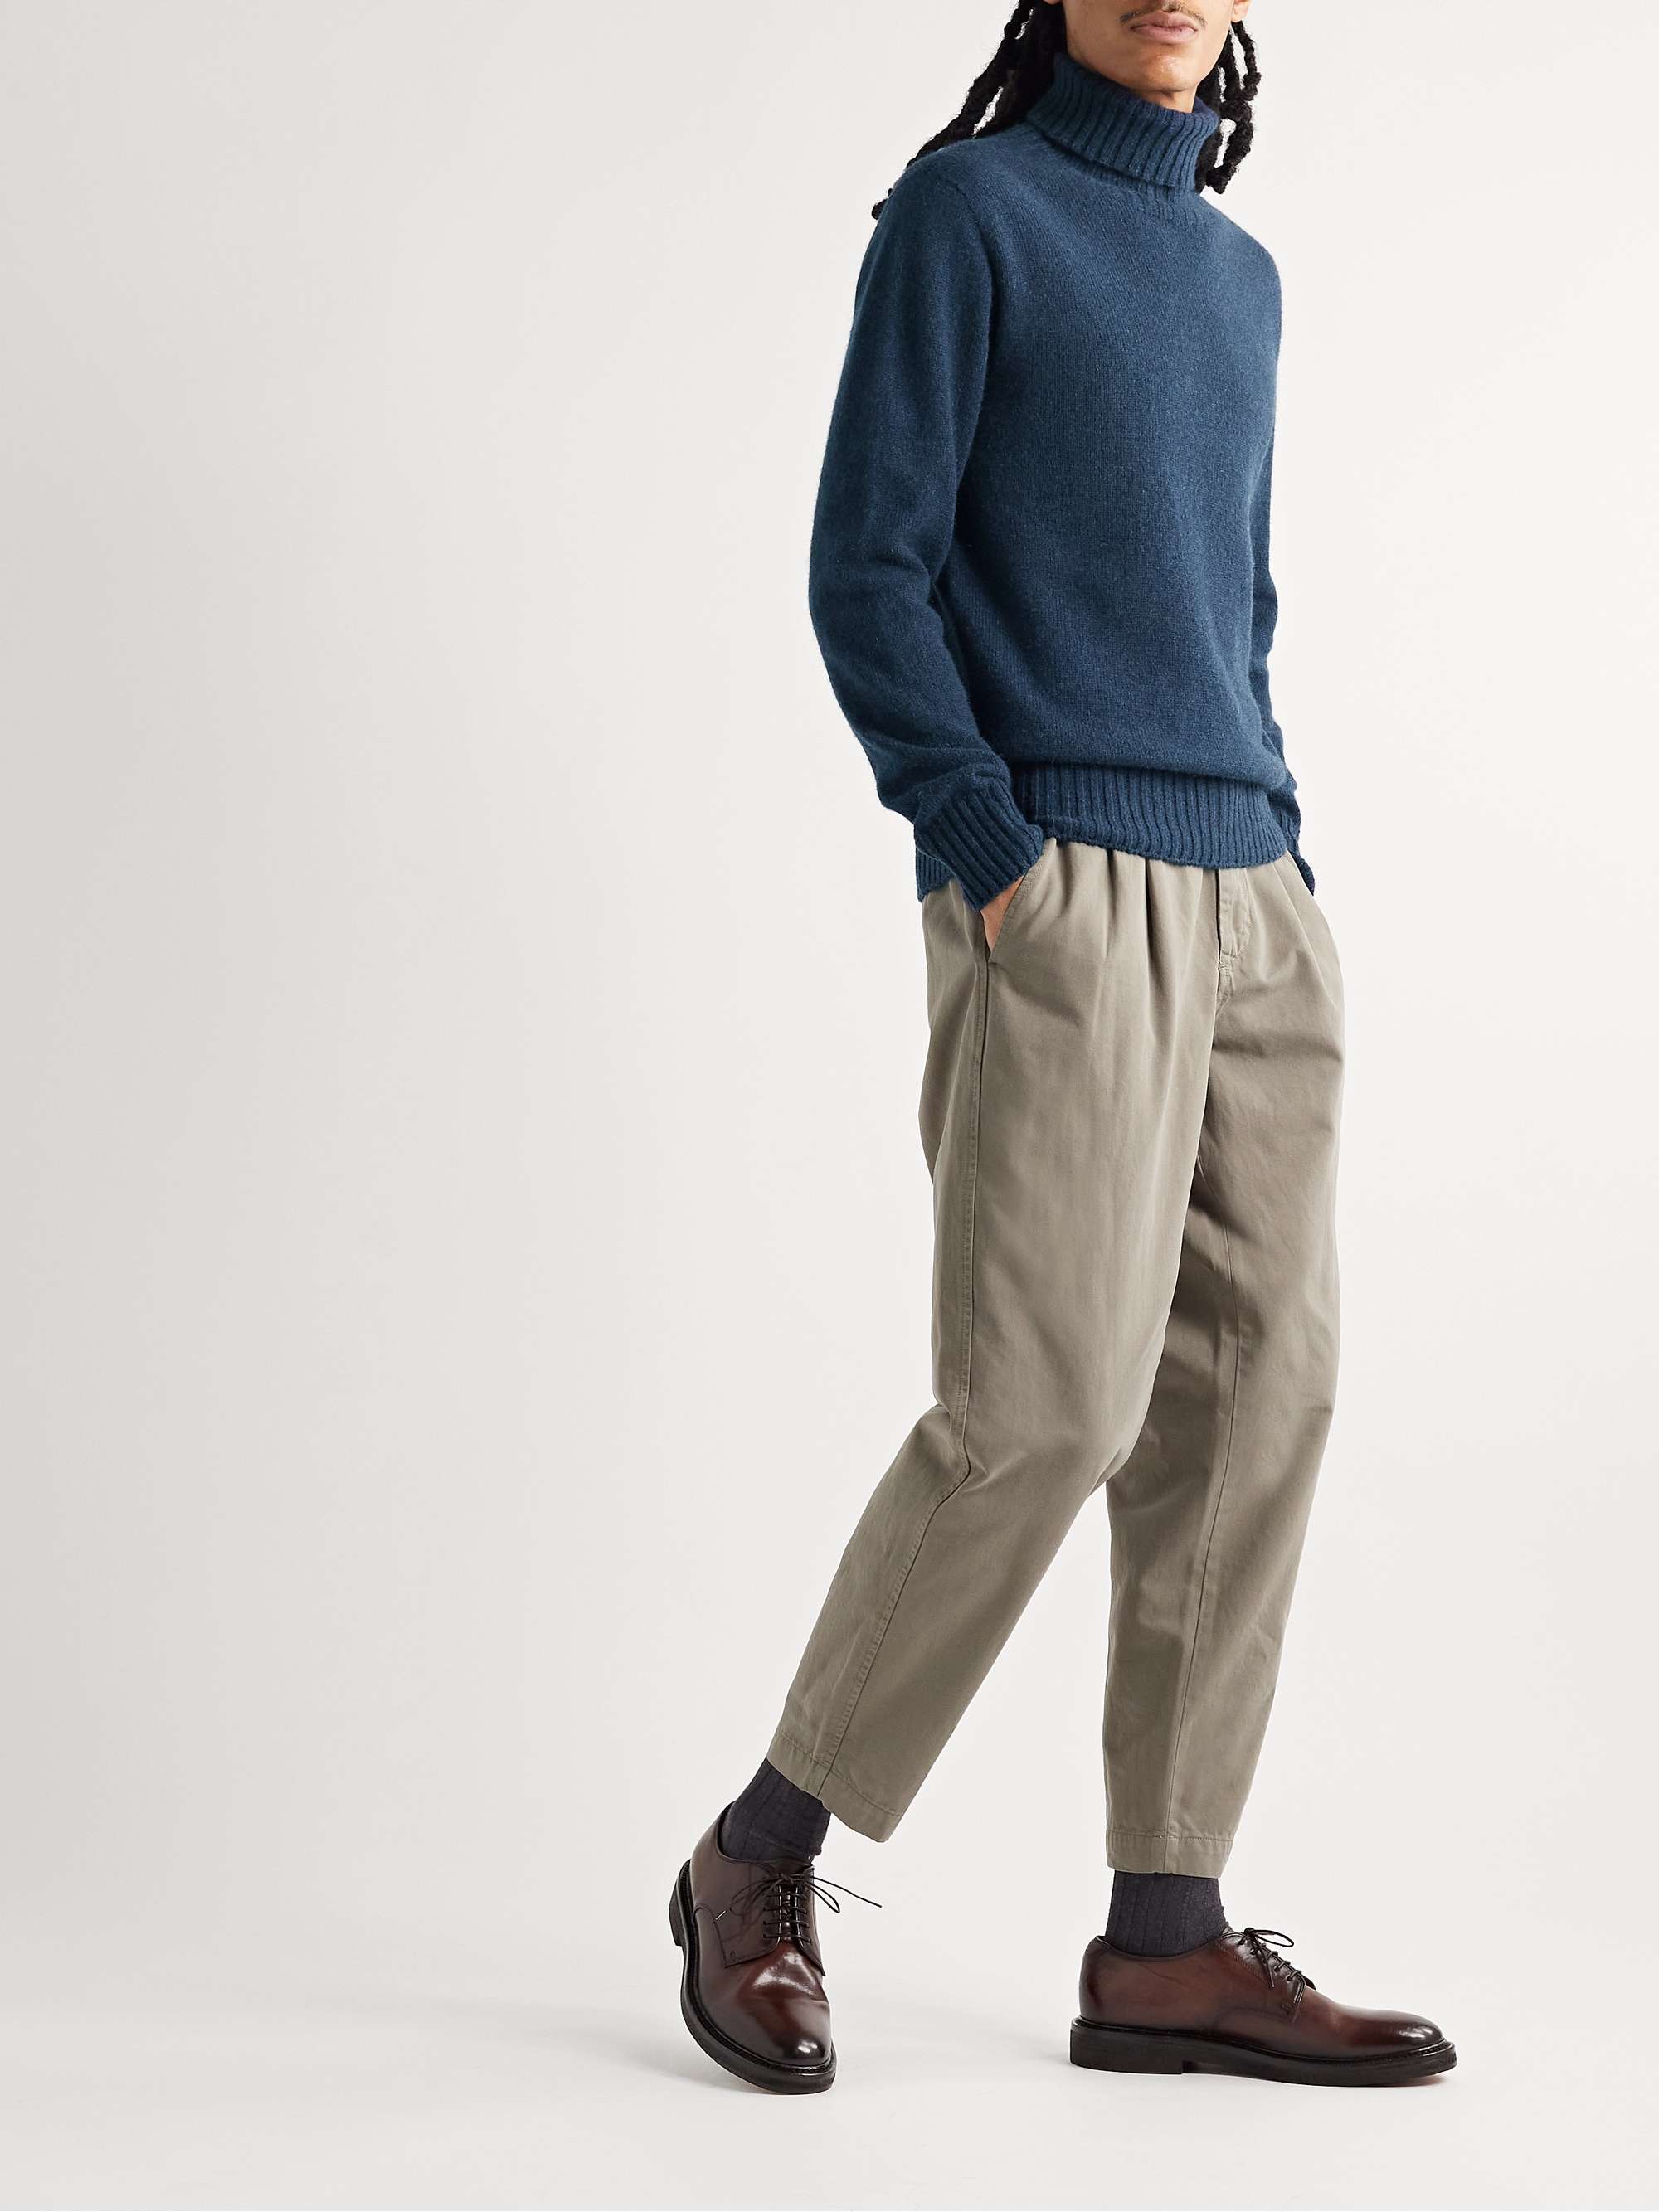 ALTEA Cashmere, Mohair and Wool-Blend Rollneck Sweater